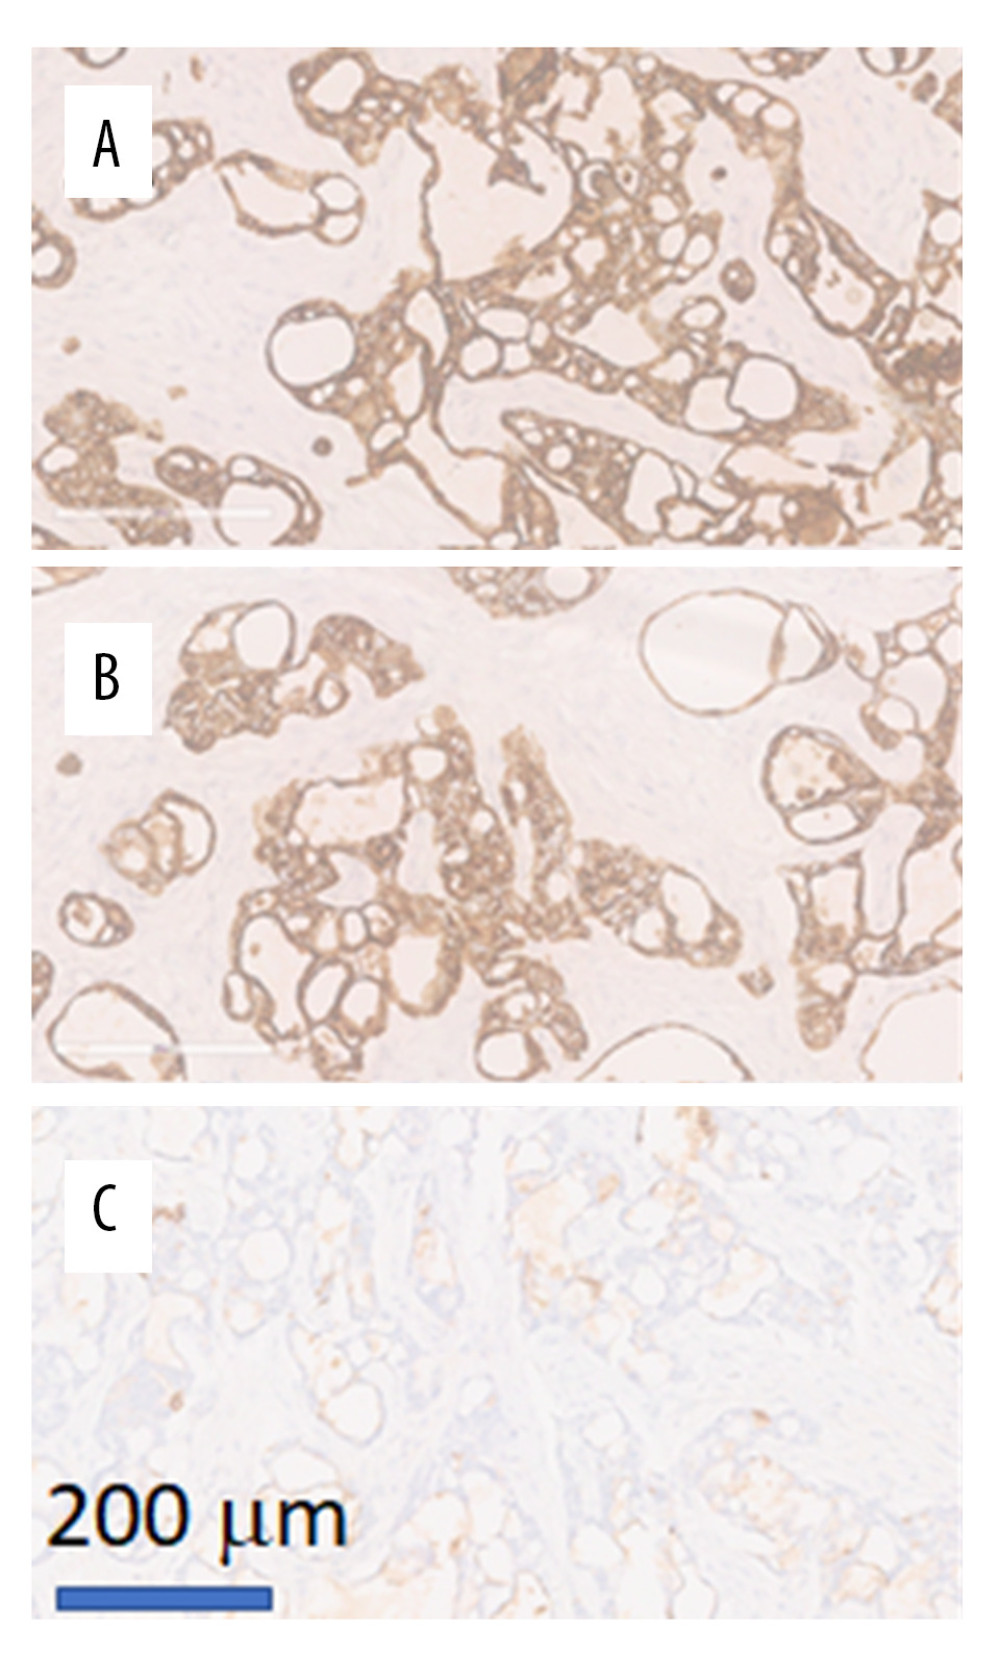 Immunohistochemical staining features of primary cutaneous cribriform apocrine carcinoma. Tumor cells are immunoreactive for (A) cytokeratin 7 and (B) high-molecular-weight keratin, and (C) focally reactive for CEA.